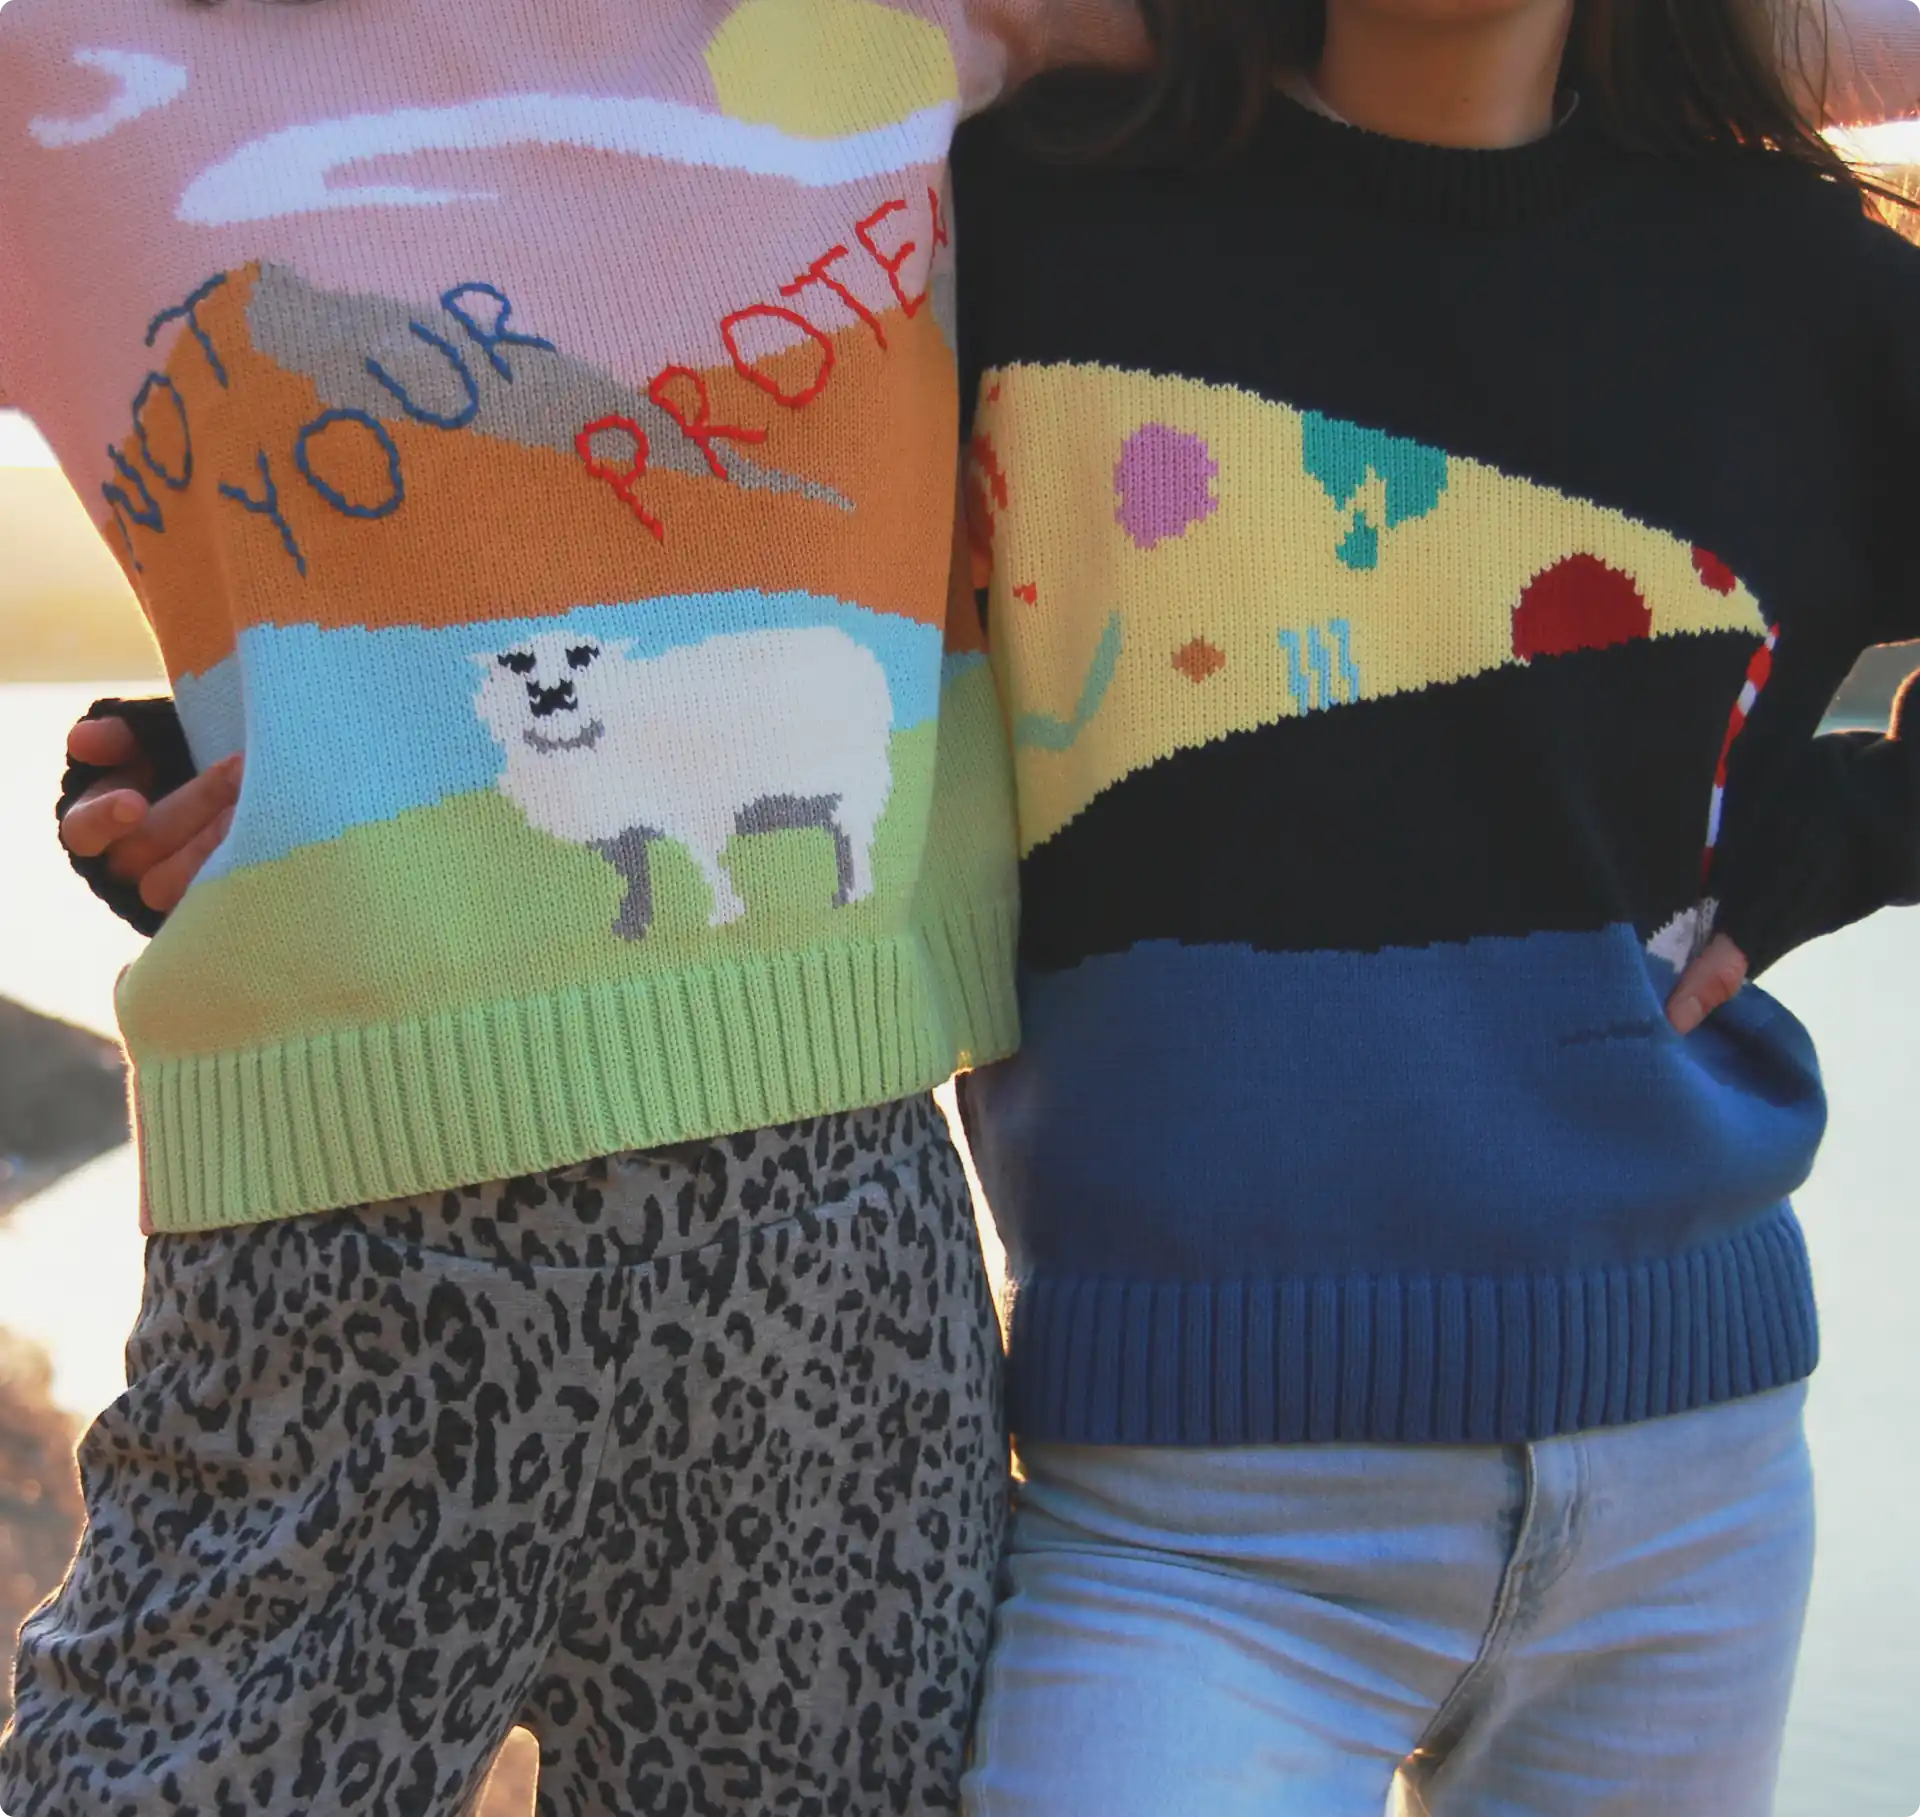 Two models standing by the lake wearing their knit sweaters, one depicting a lighthouse on a dark night and the other a sheep on the hills.